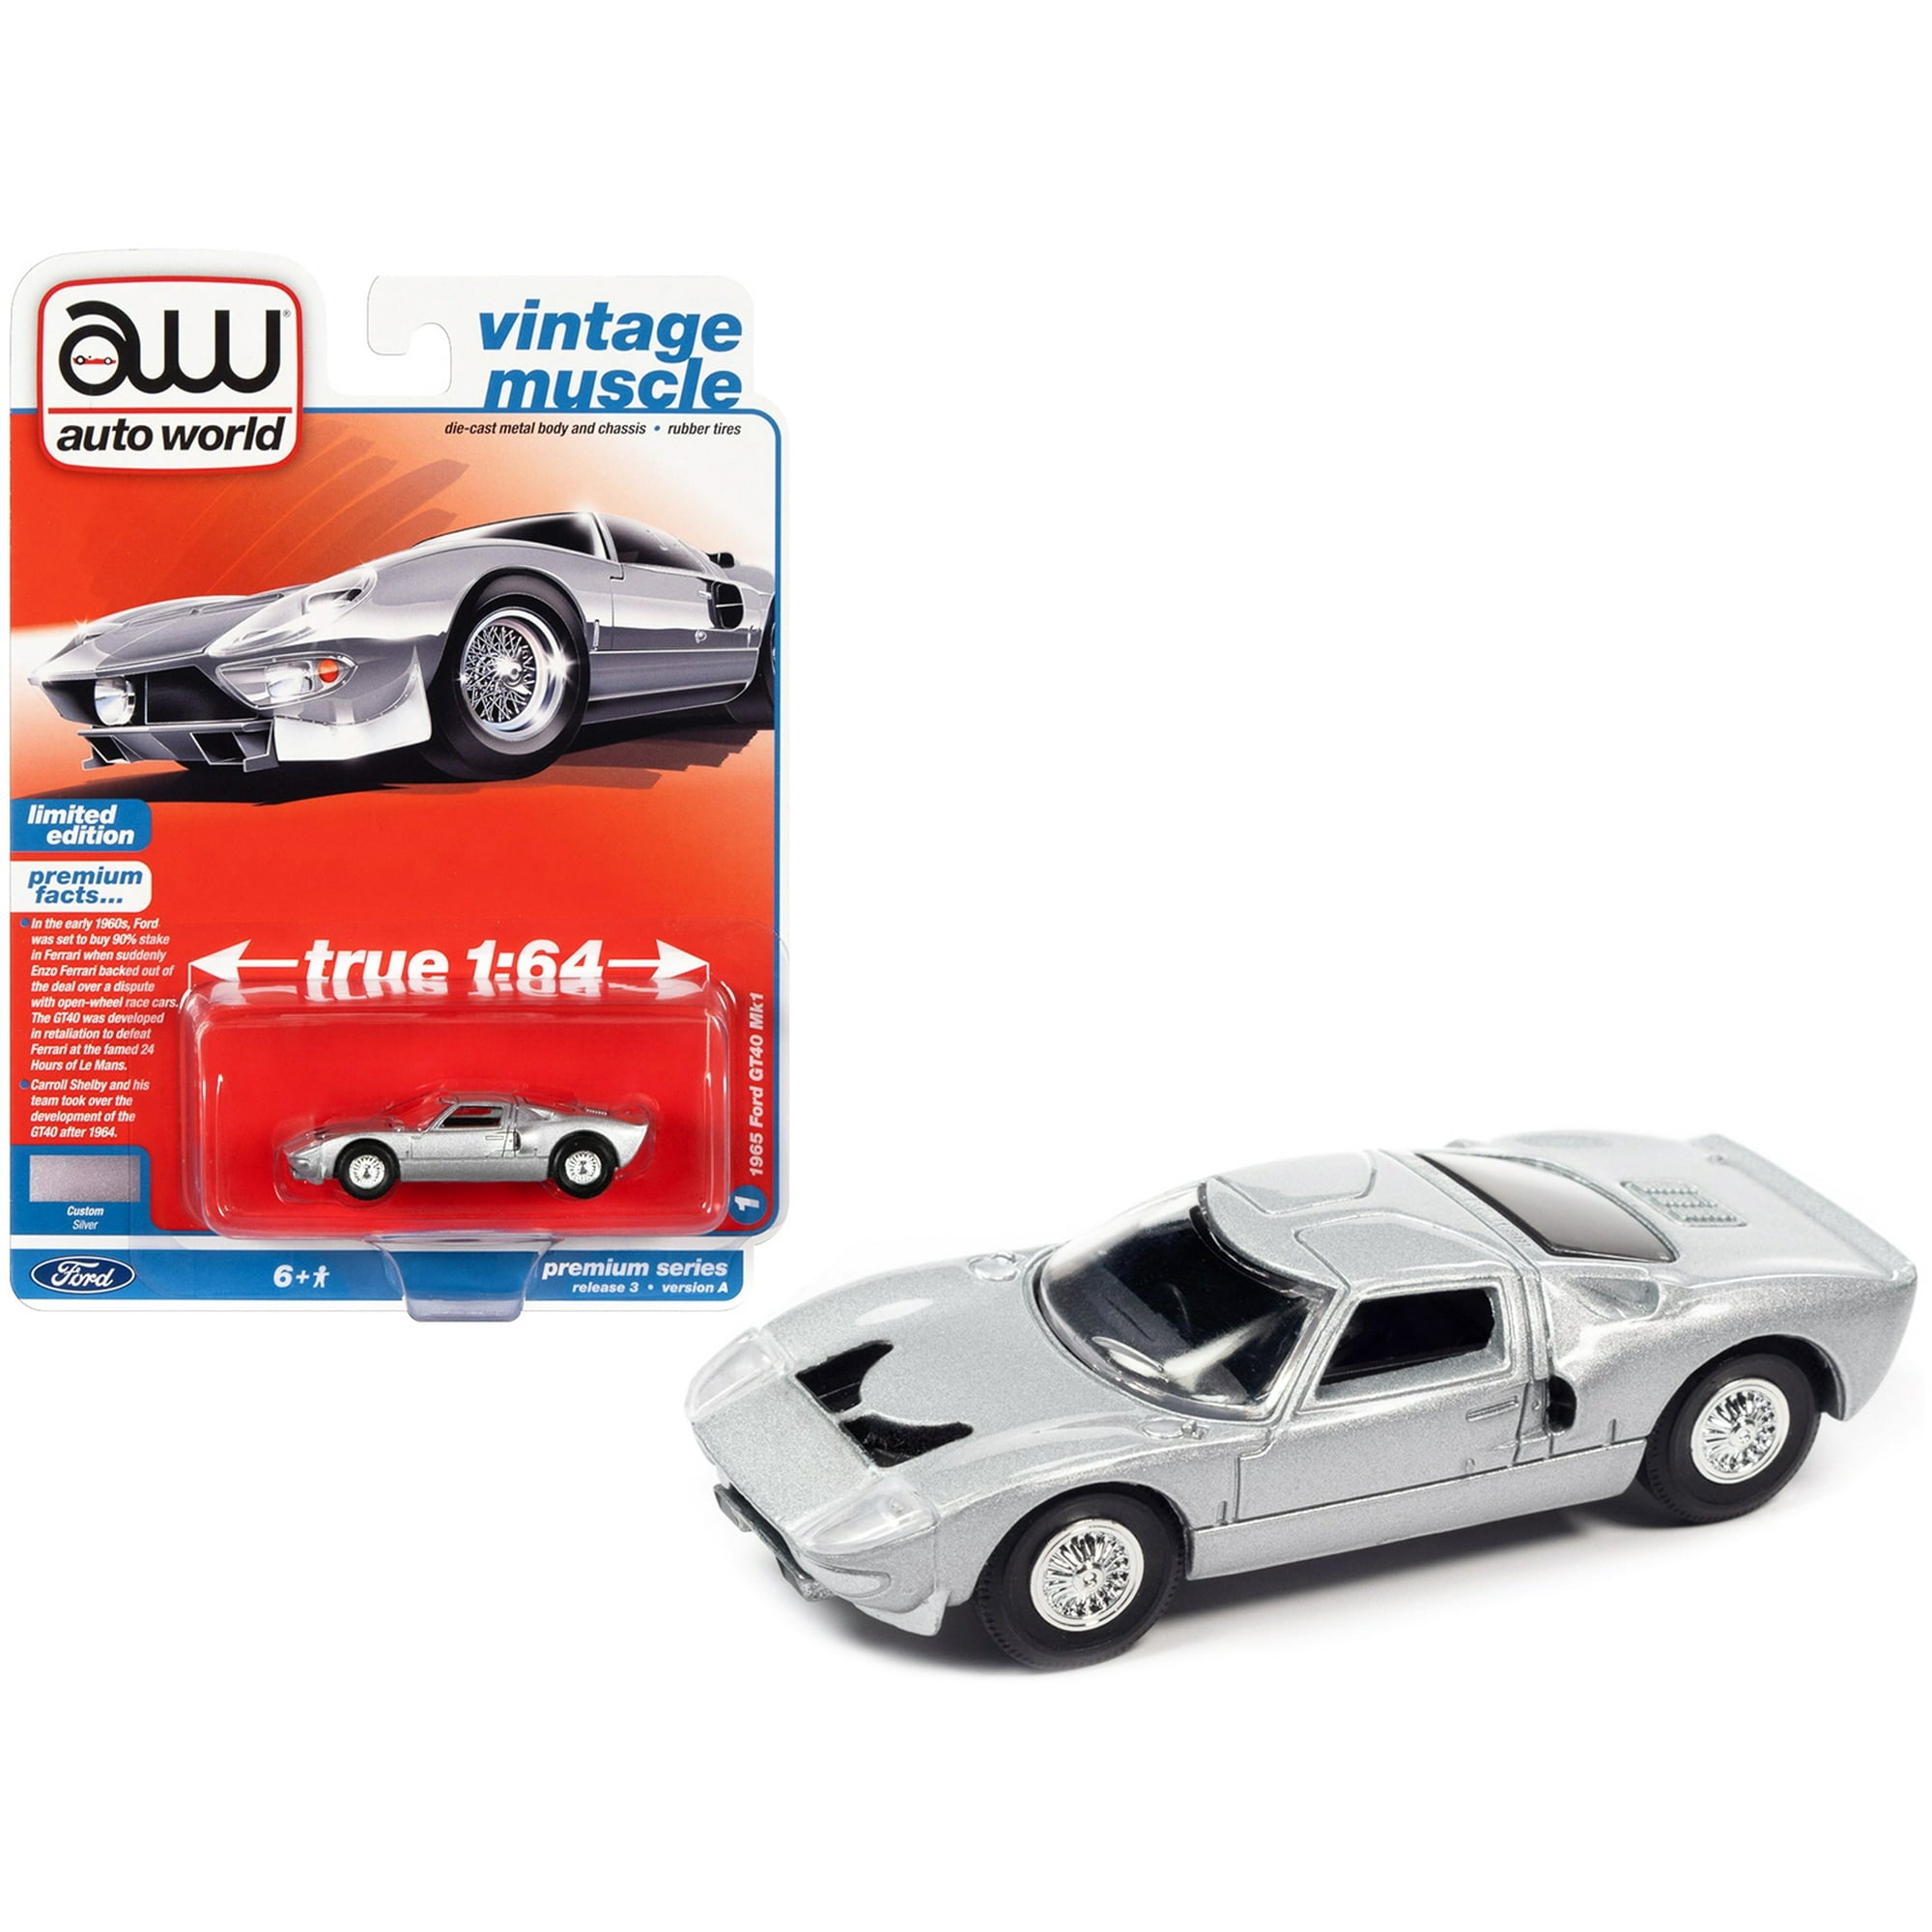 1/64 1965 FORD GT40 MK1 SILVER METALLIC - VINTAGE MUSCLE